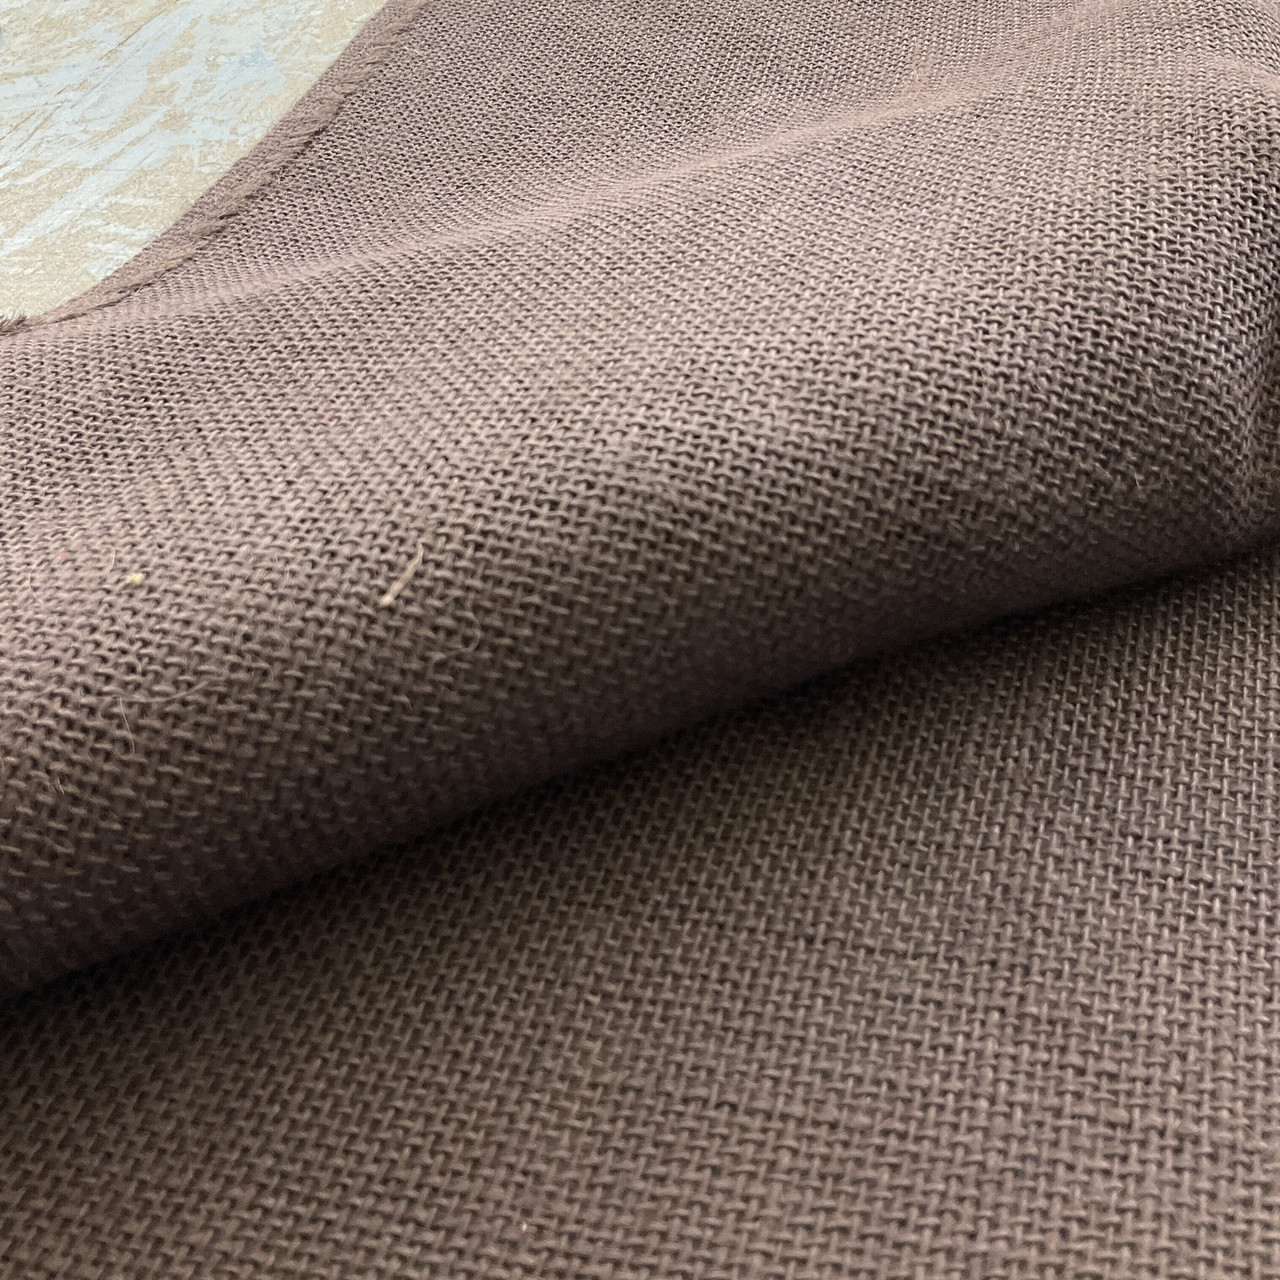 Burlap Fabric: What It Is And Its Many Uses